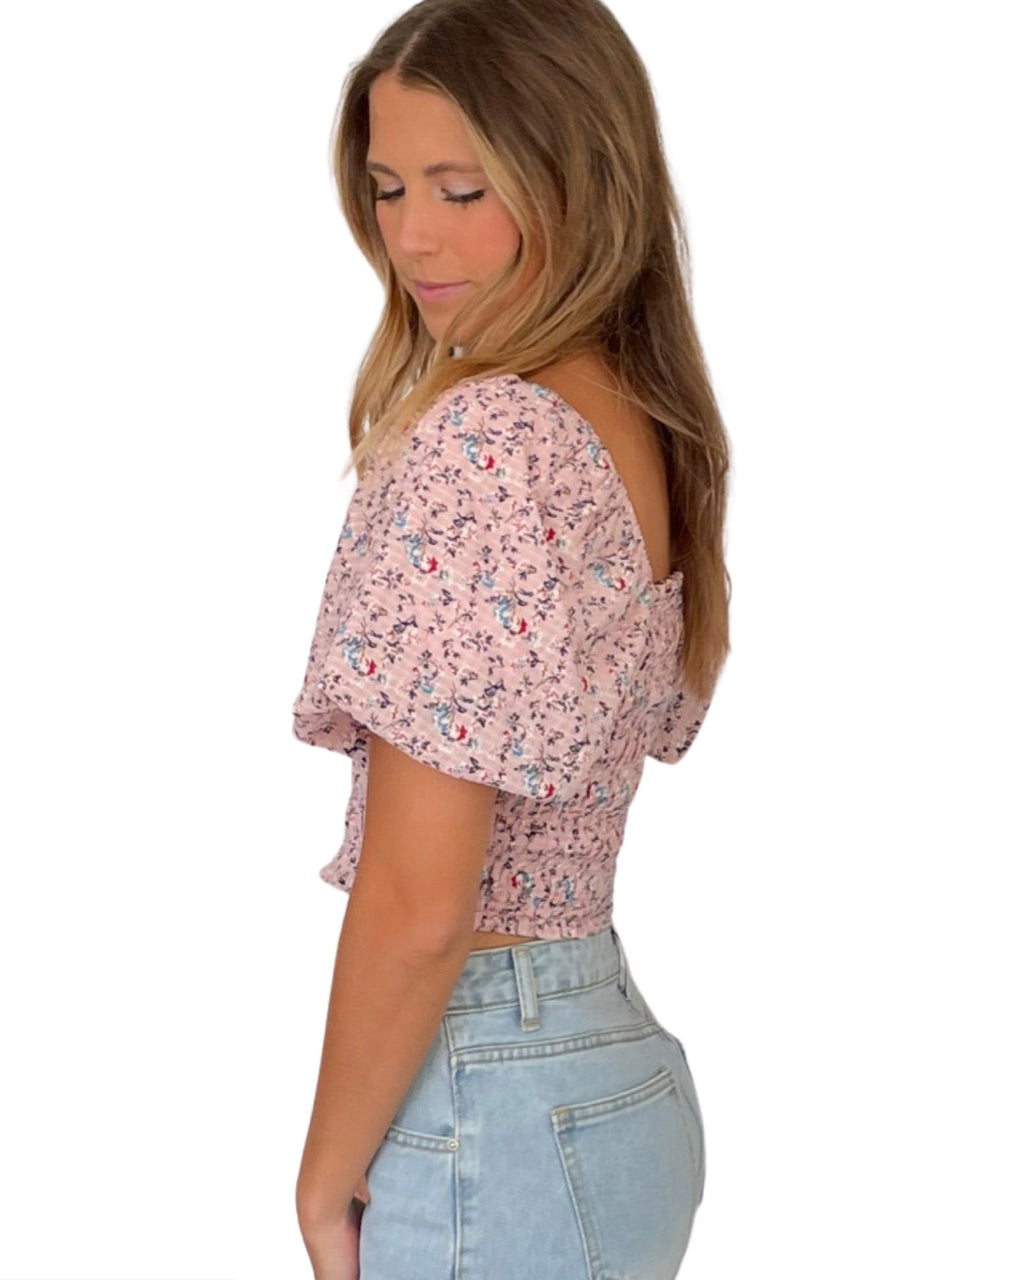 PUFF SLEEVE PINK + NAVY FLORAL TOP